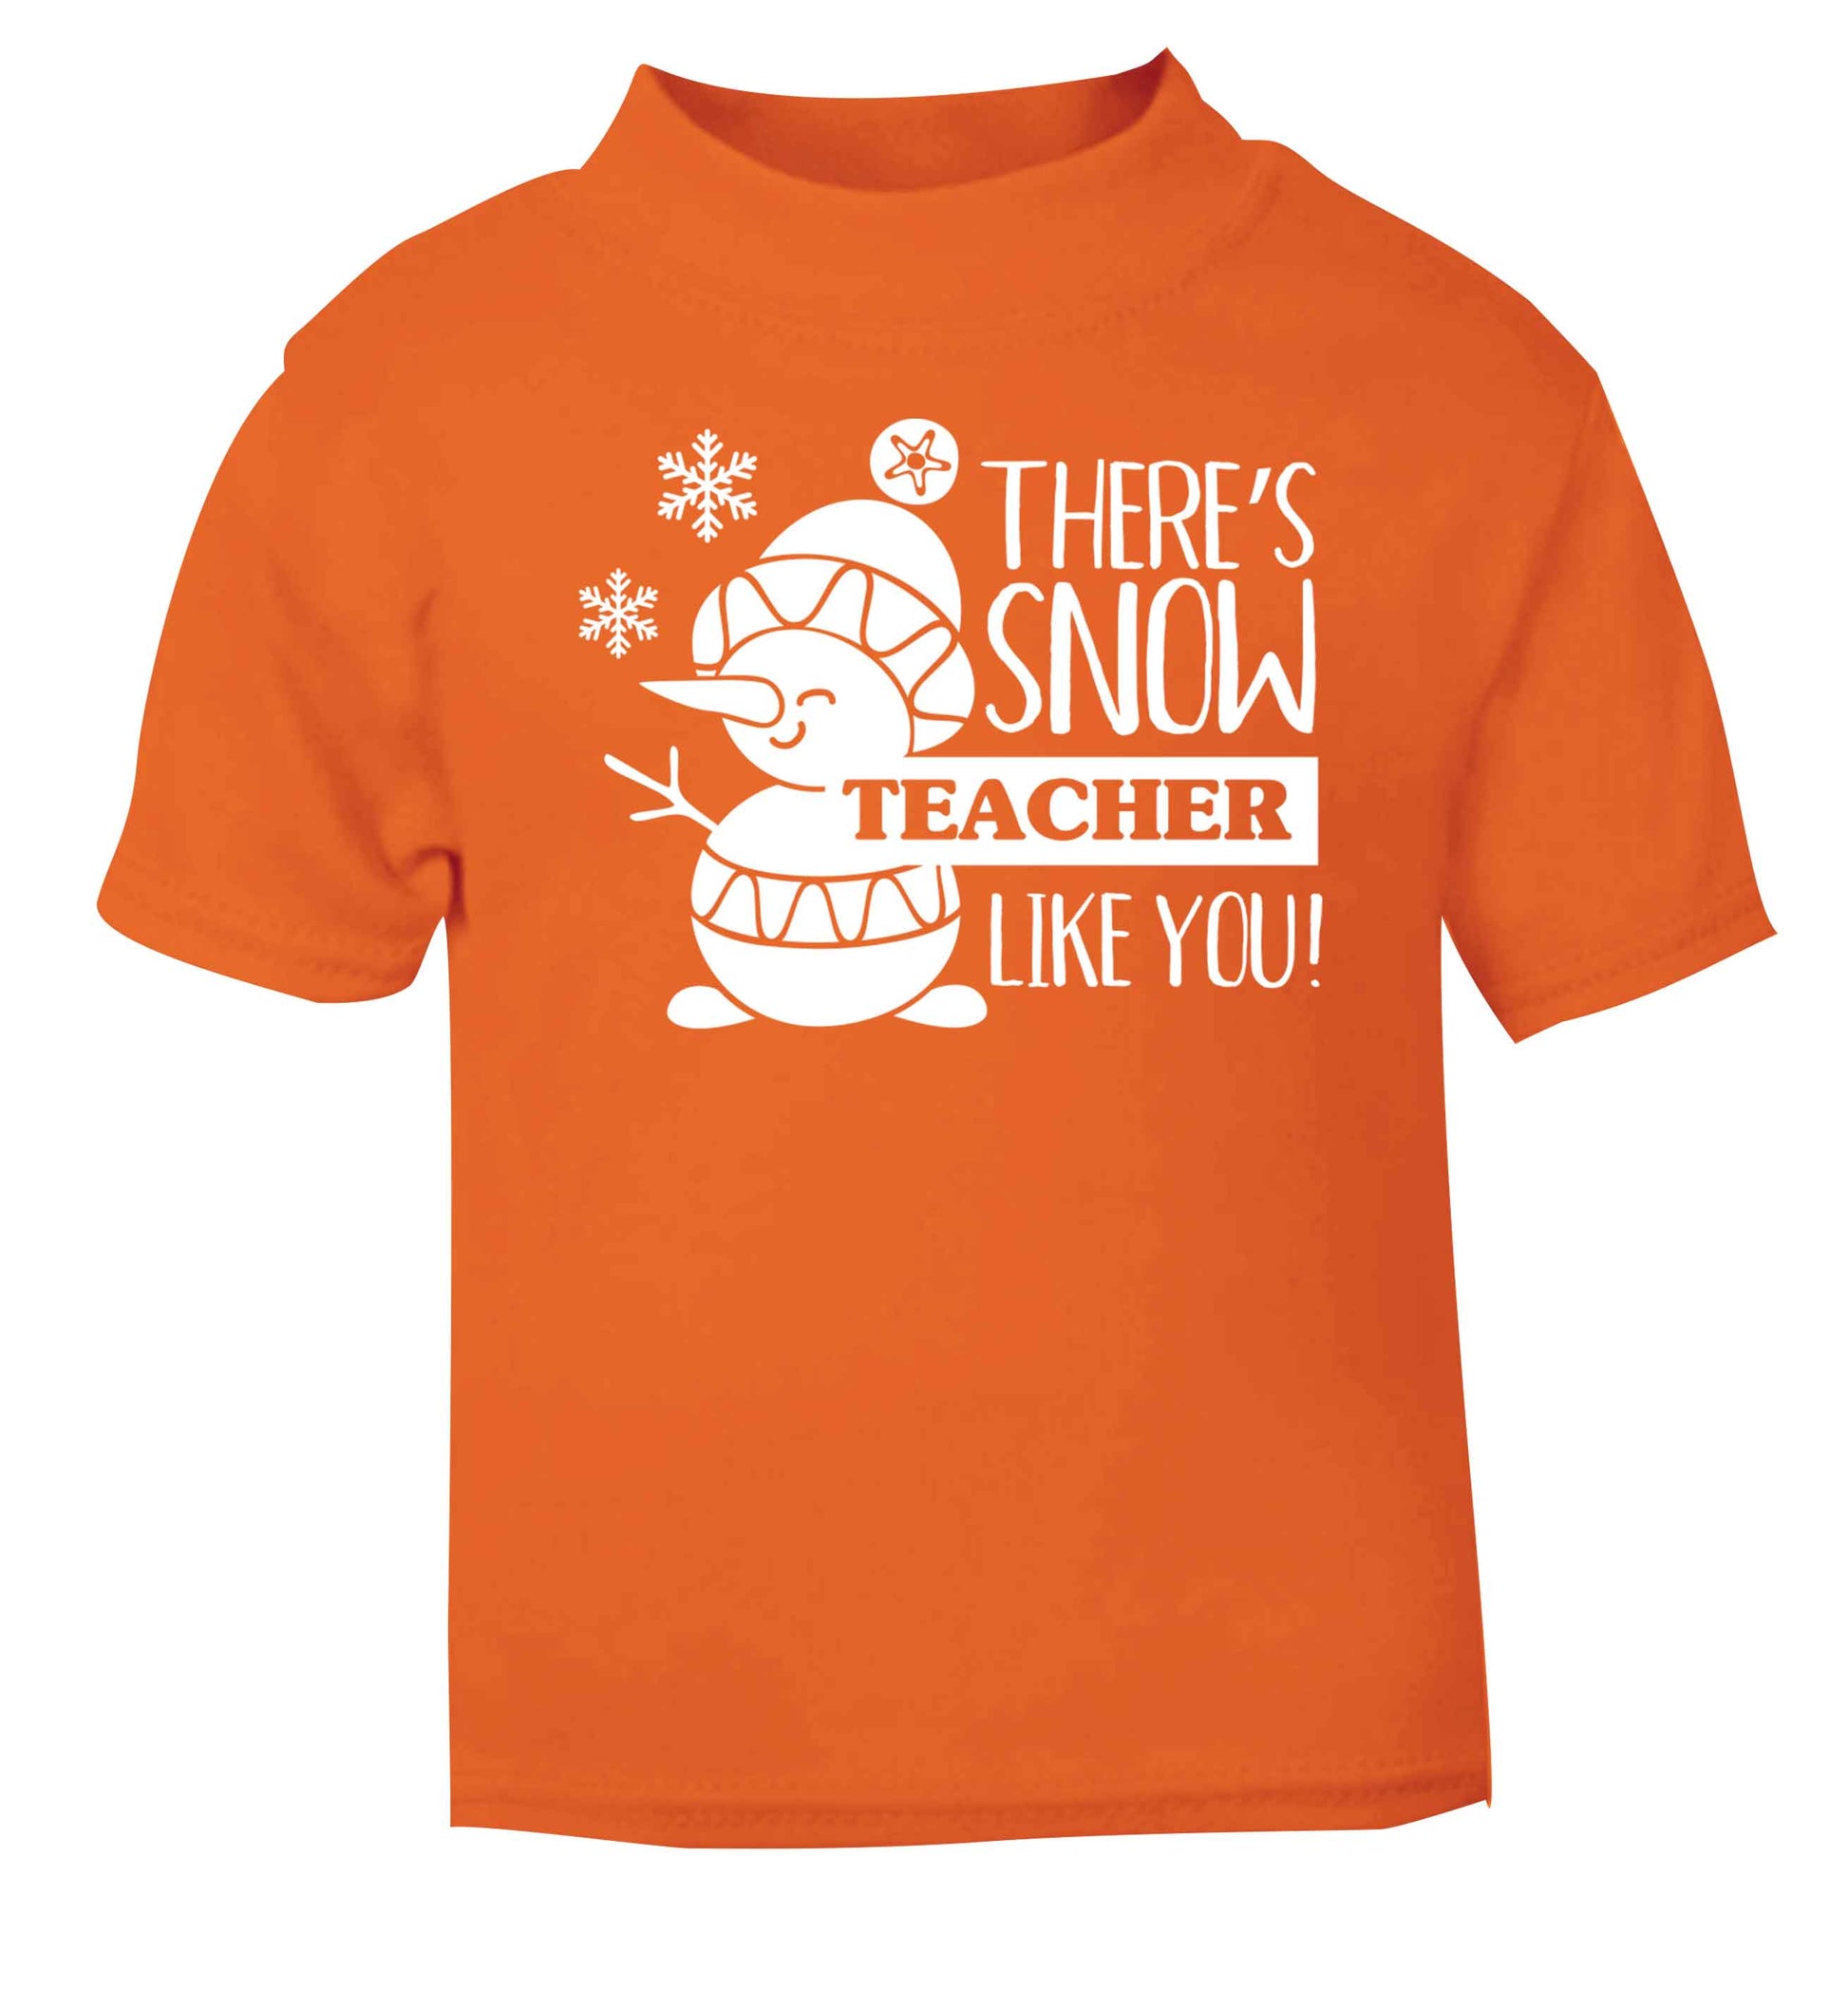 There's snow teacher like you orange baby toddler Tshirt 2 Years